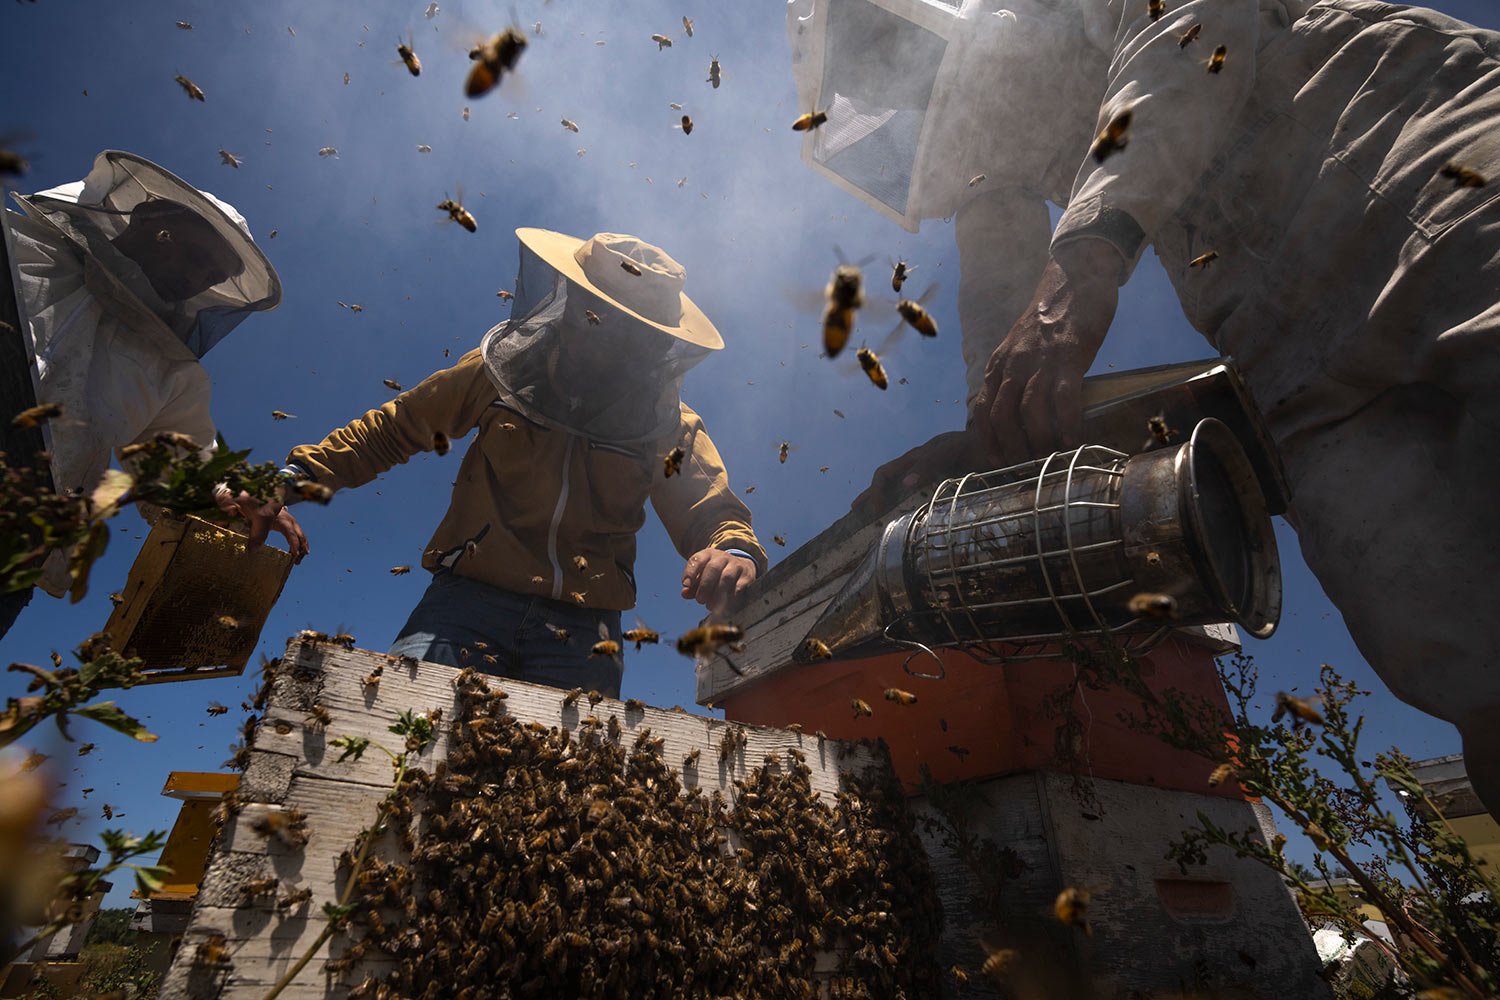  Beekeepers lift honeycombs from a beehive after using smoke to calm the bees, during the honey harvest along the Gaza Strip's border with Israel, in Rafah, southern Gaza Strip, Thursday, April 27, 2023. (AP Photo/Fatima Shbair) 